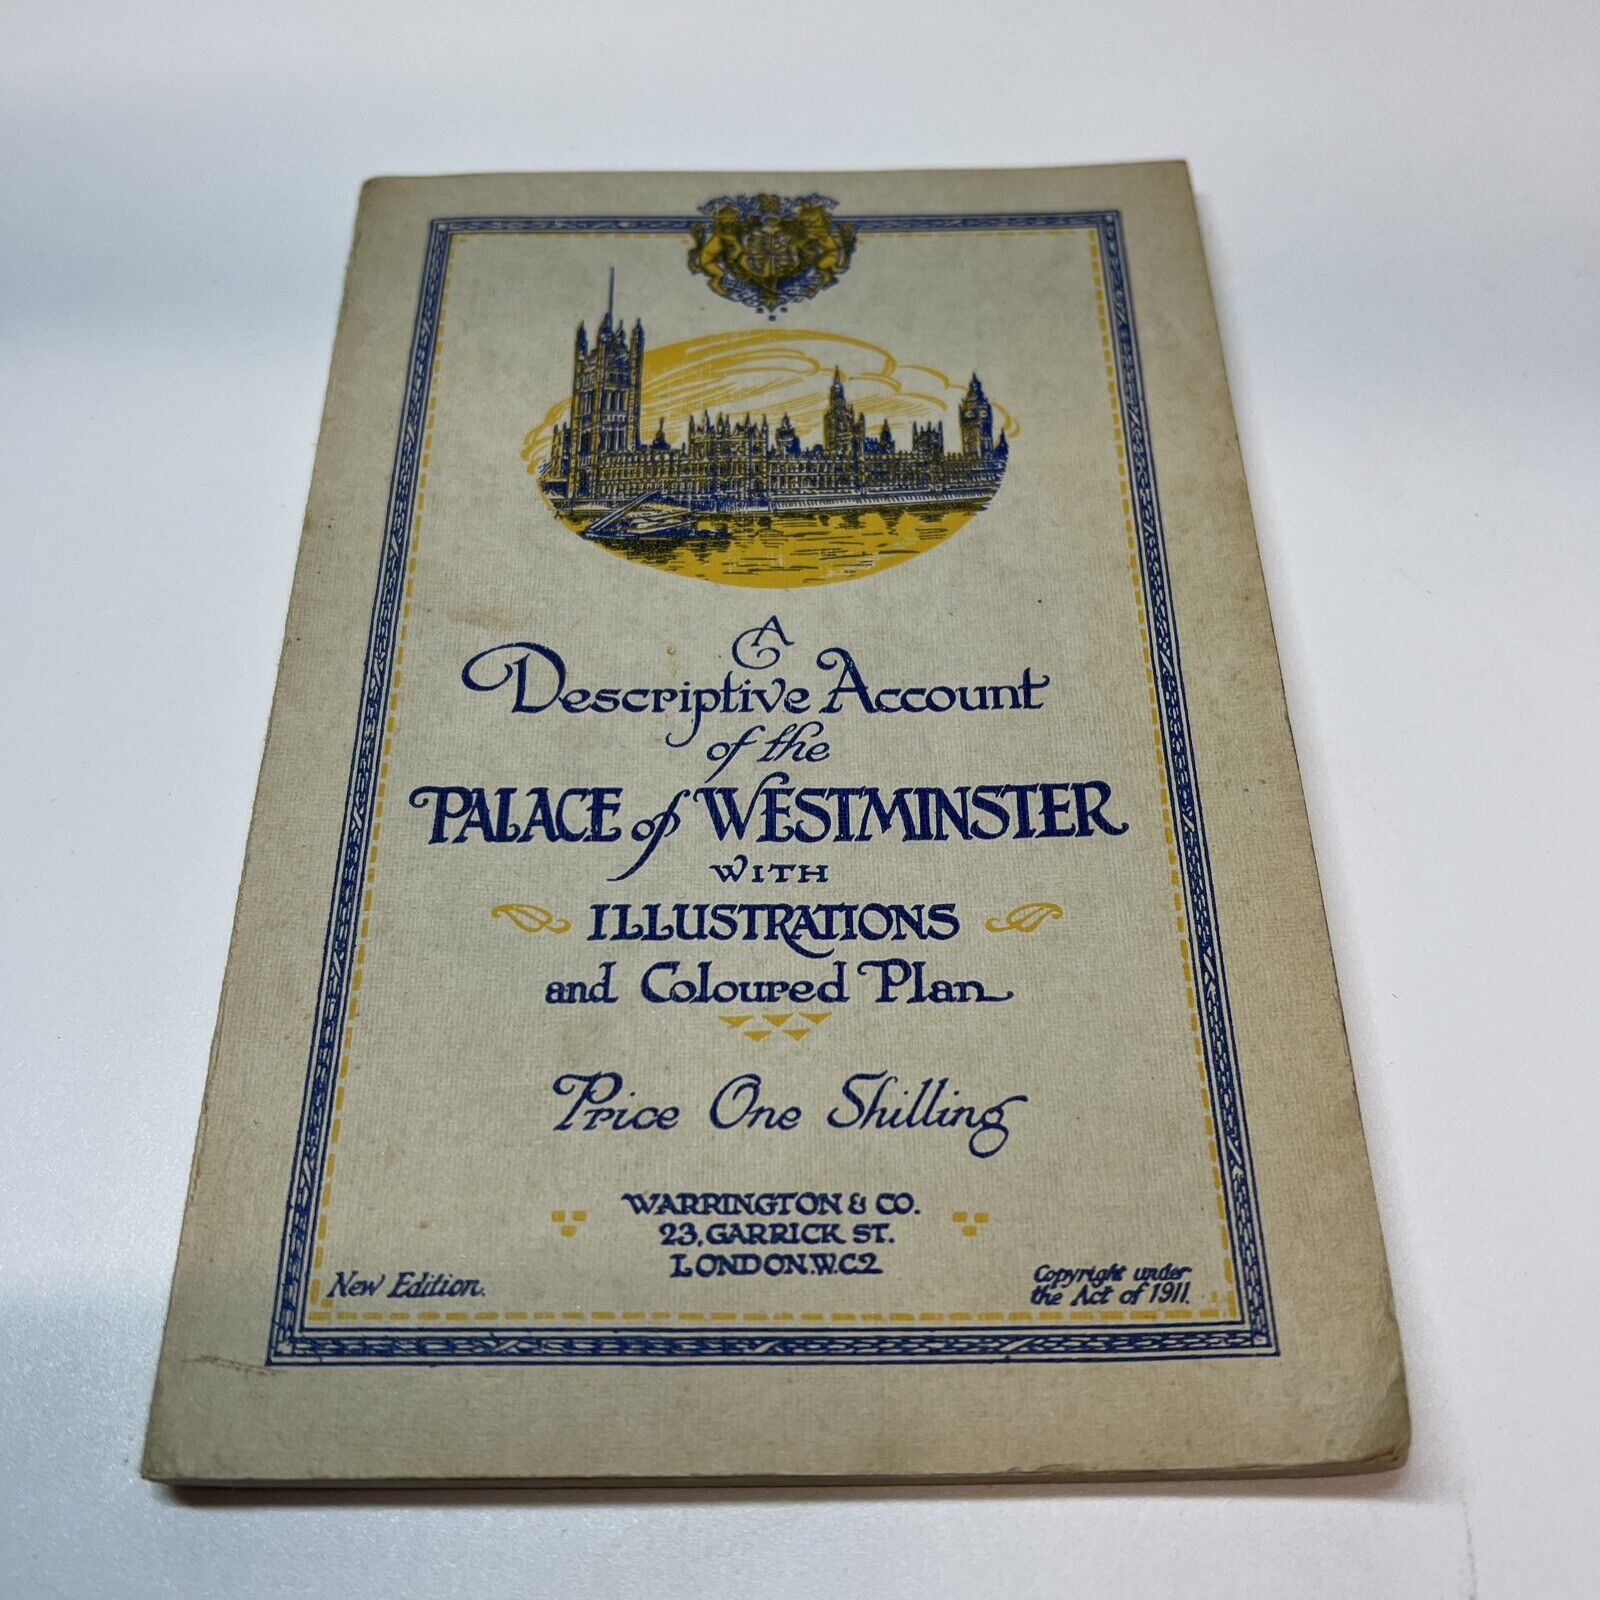 Descriptive Account of the Palace Westminister ︱Illustrations ︱1911︱The Palace︱